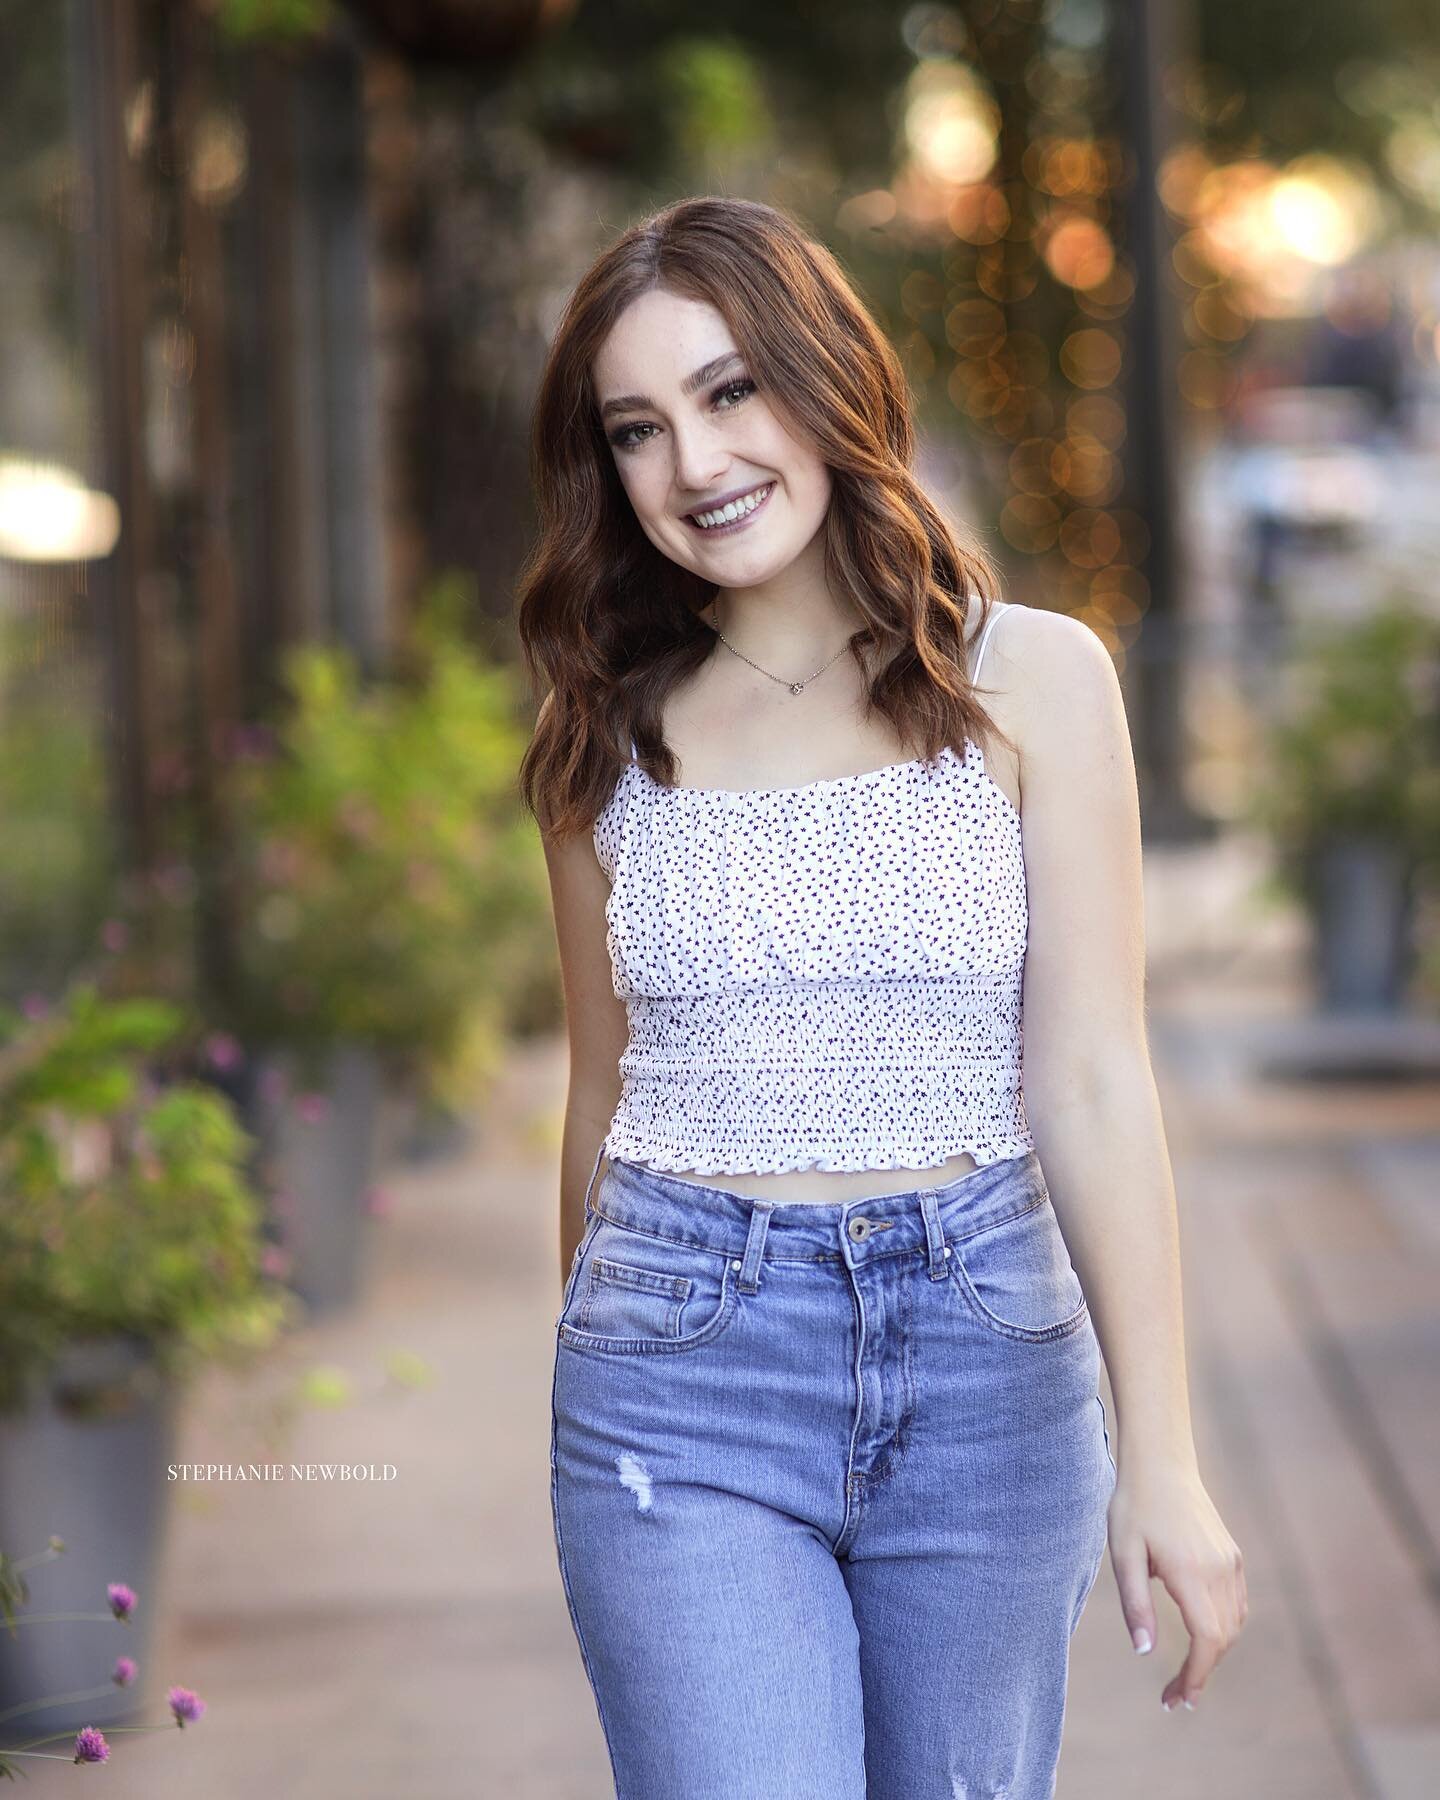 It&rsquo;s GINGER FRIDAY!!!🌺

JK I just made that up because S A R A H 💫

#gingerfriday #fridayvibes #downtowntucson #seniorpictures #seniorphotographer